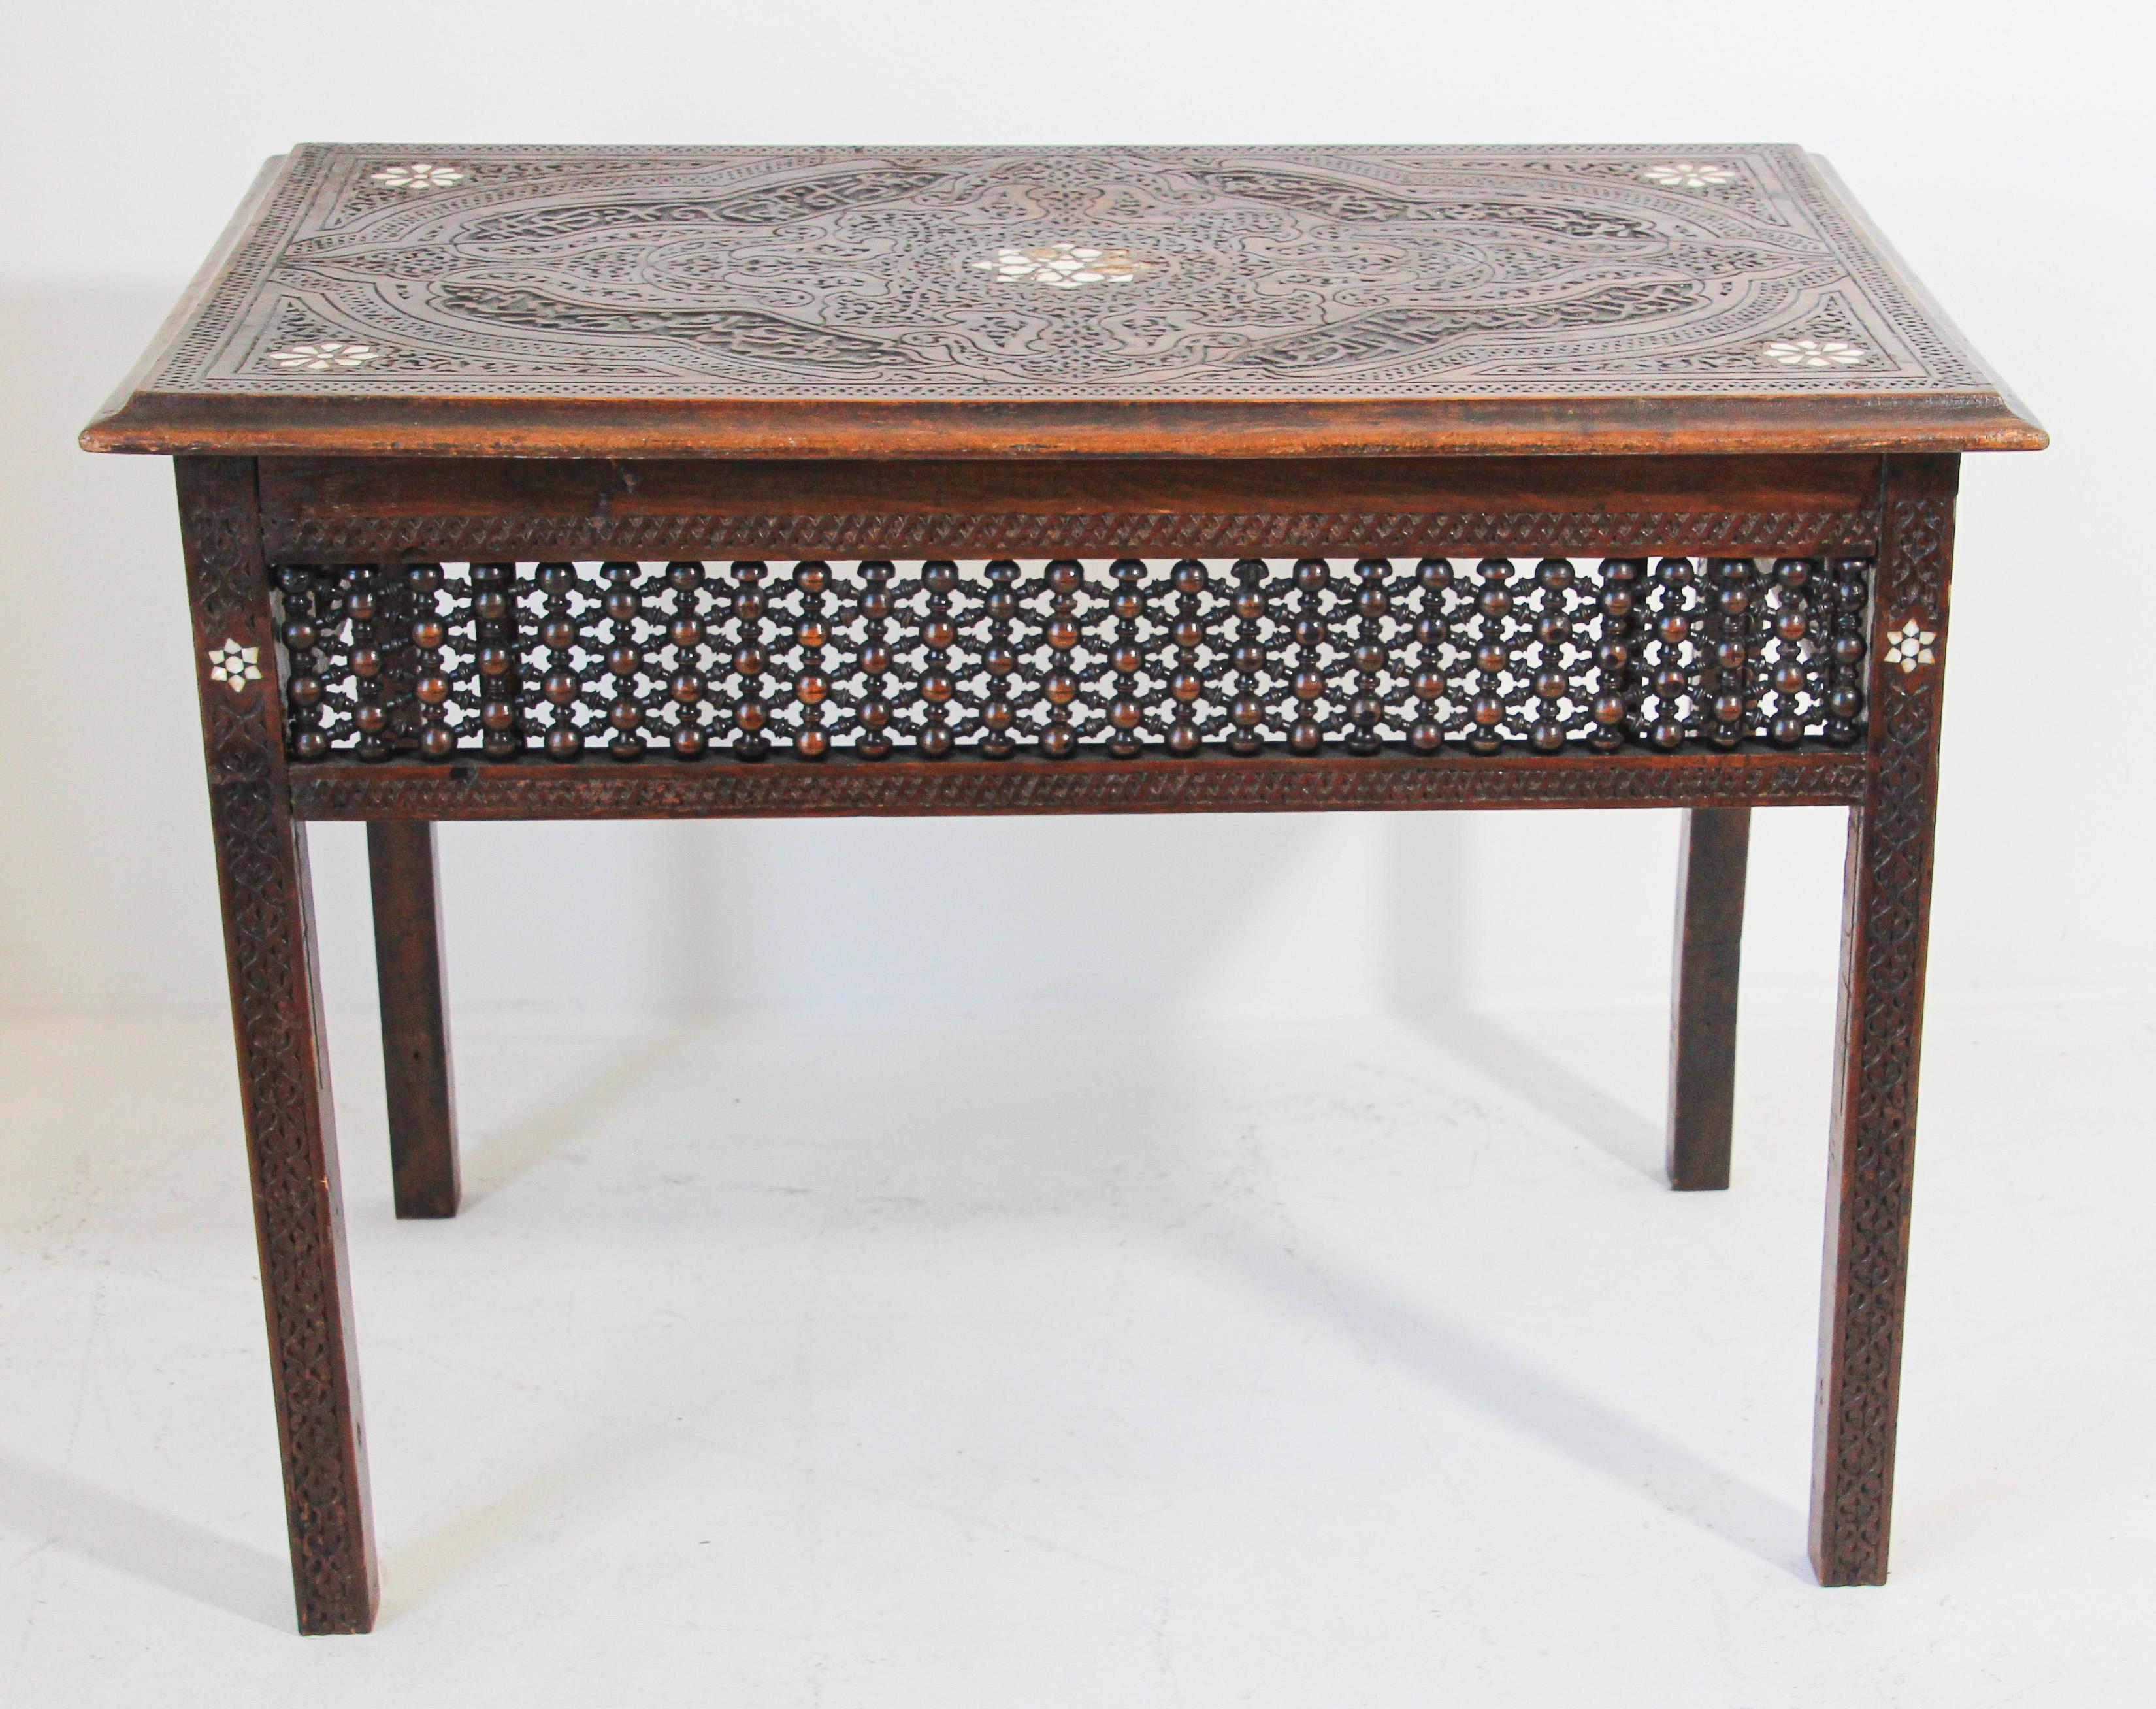 19th Century Moorish tea table inlaid with mother of pearl.
19th century Syrian style tea table, finely hand carved with foliages, arabesque design and Arabic writing, inlaid with mother of pearl in star Moorish designs, the sides are made of fine